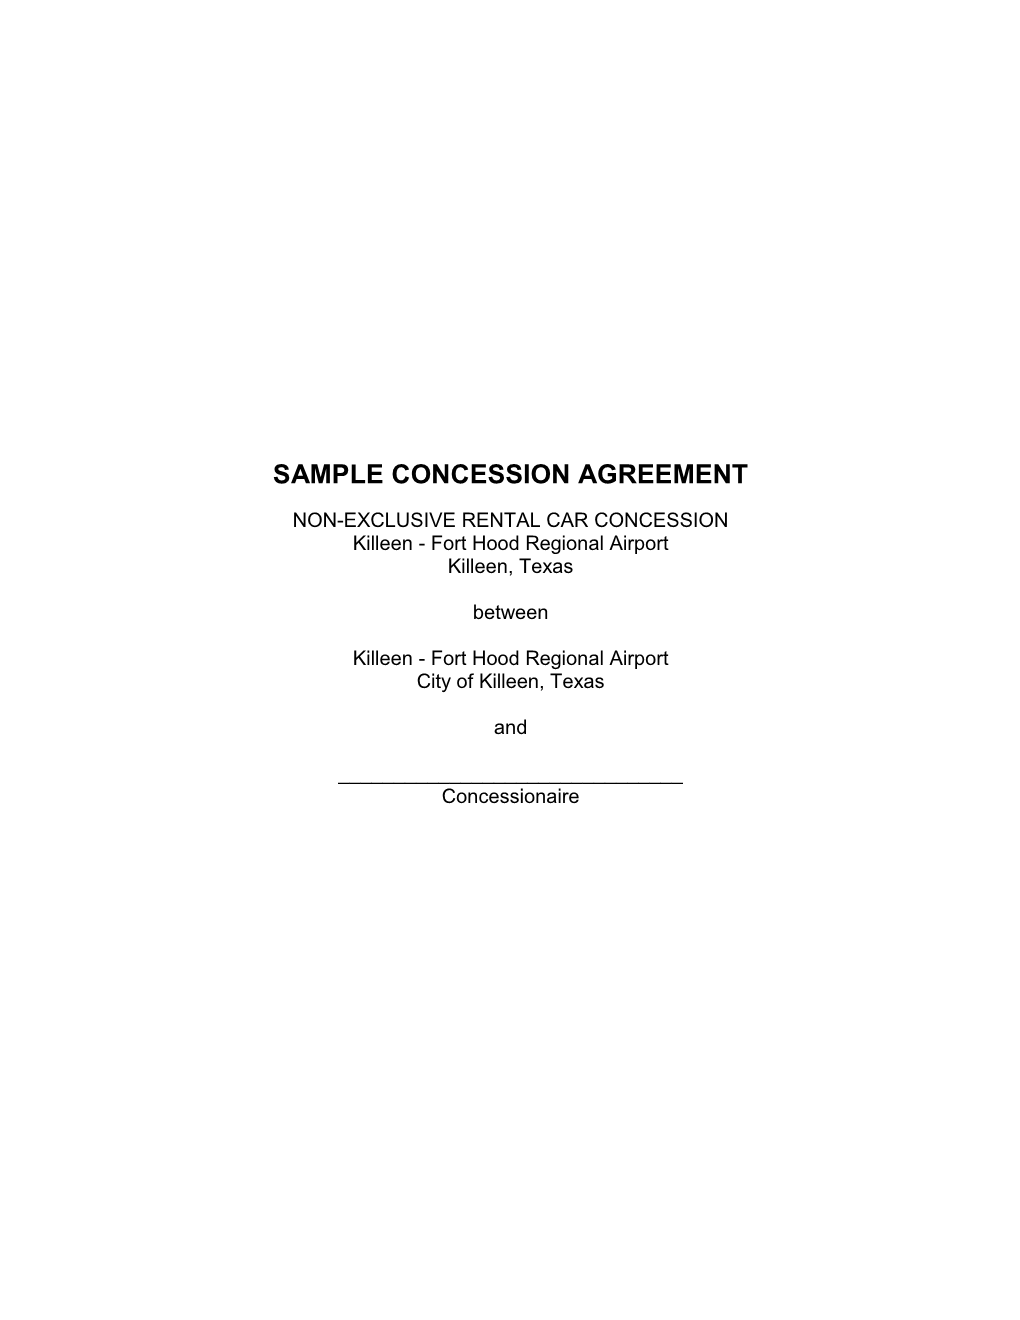 Sample Concession Agreement